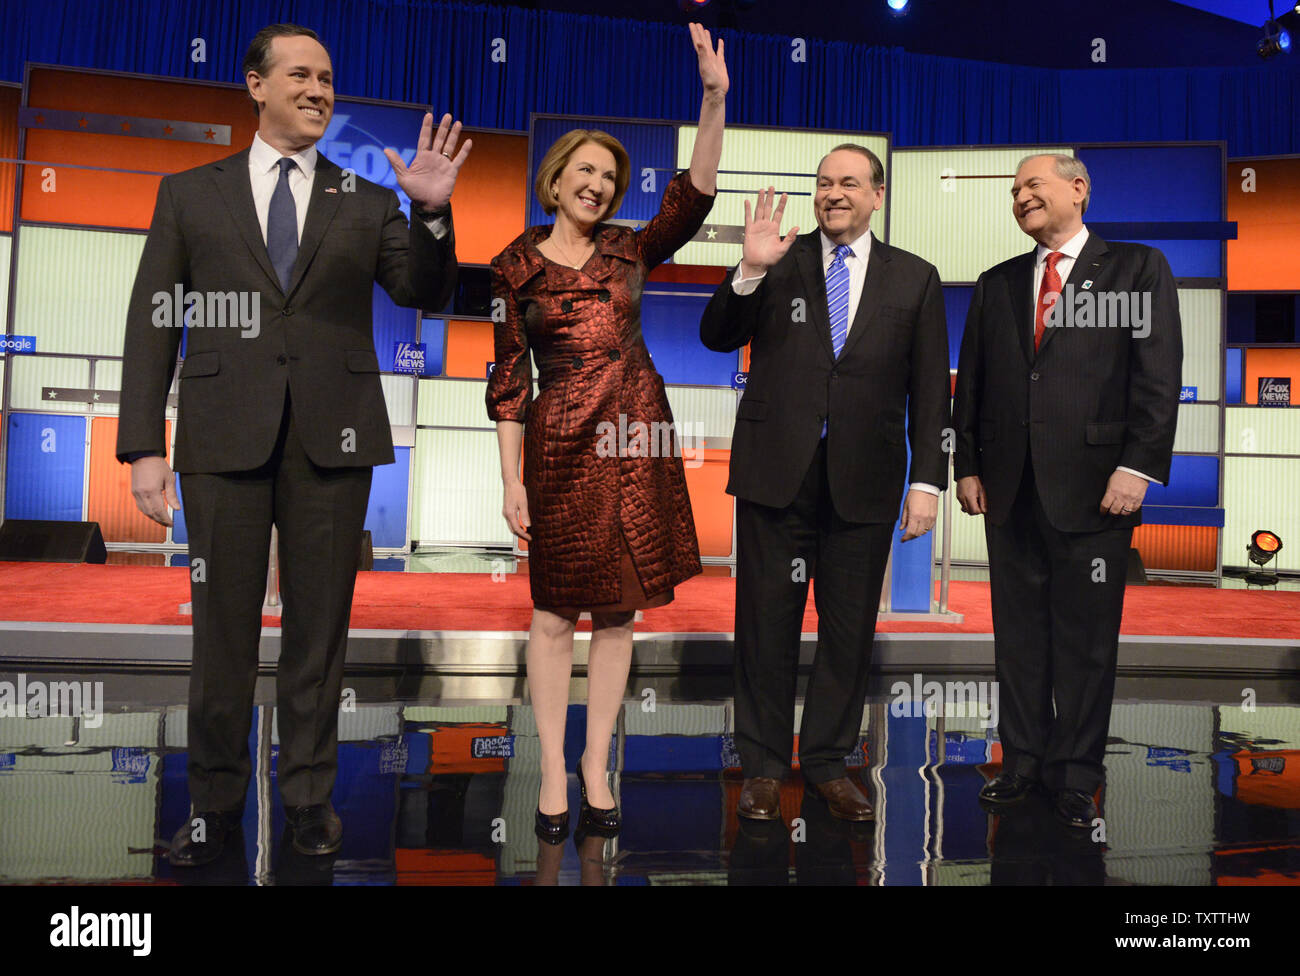 2016 Republican presidential candidates (L-R) former Pennsylvania Sen. Rick Santorum, business woman Carly Fiorina, former Arkansas Gov. Mike Huckabee and former Virginia Gov. Jim Gilmore arrive onstage as the undercard of a GOP debate hosted by Fox News, January 28, 2016, in Des Moines, Iowa. The debate is the final one before Iowa's first-in-the-nation caucuses, February 1.      Photo by Mike Theiler/UPI Stock Photo